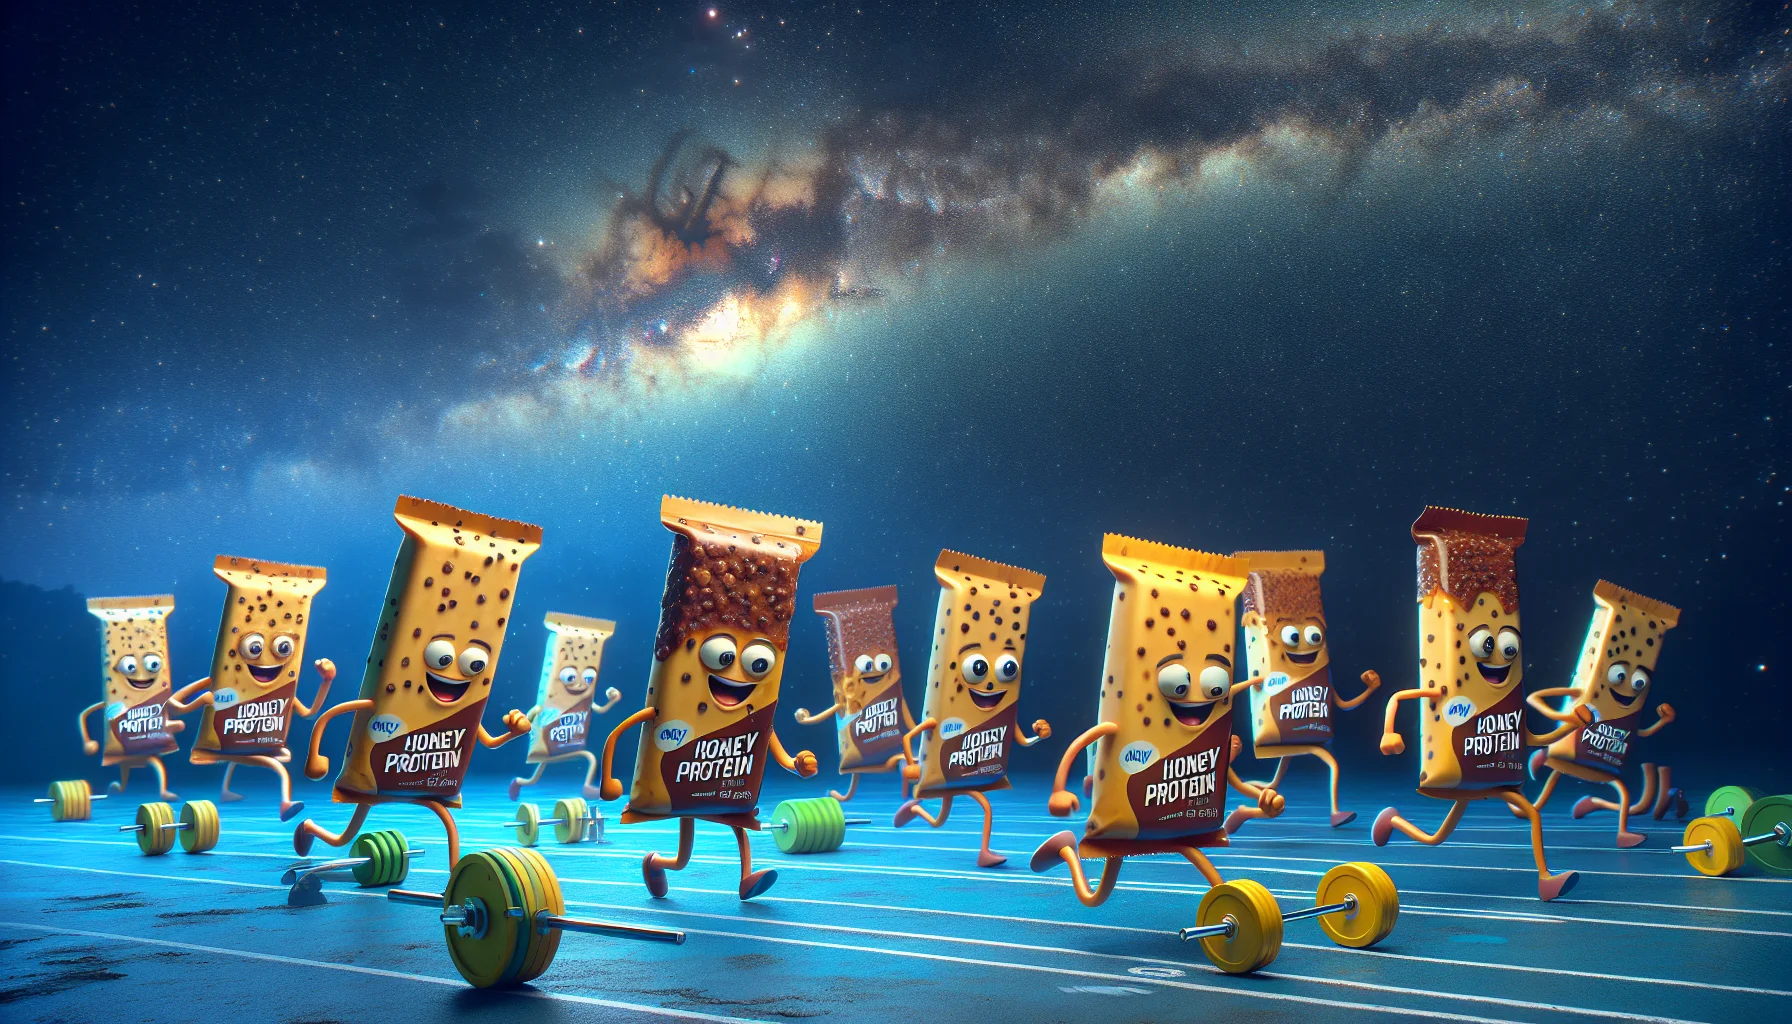 Imagine a lighthearted and vibrant scene set under a night sky filled with twinkling stars. The beautiful milky way draped across the sky illuminates a group of animated honey protein bars. These bars, as if brought to life, are humorously engaging in various sporting activities like sprinting, weightlifting, and cycling. Their funny expressions and actions create a whimsical atmosphere, cleverly advocating for the use of such supplements in sports. The scene aims to attract viewers with its charm and unique approach to promoting a healthy, active lifestyle with right nutrition.